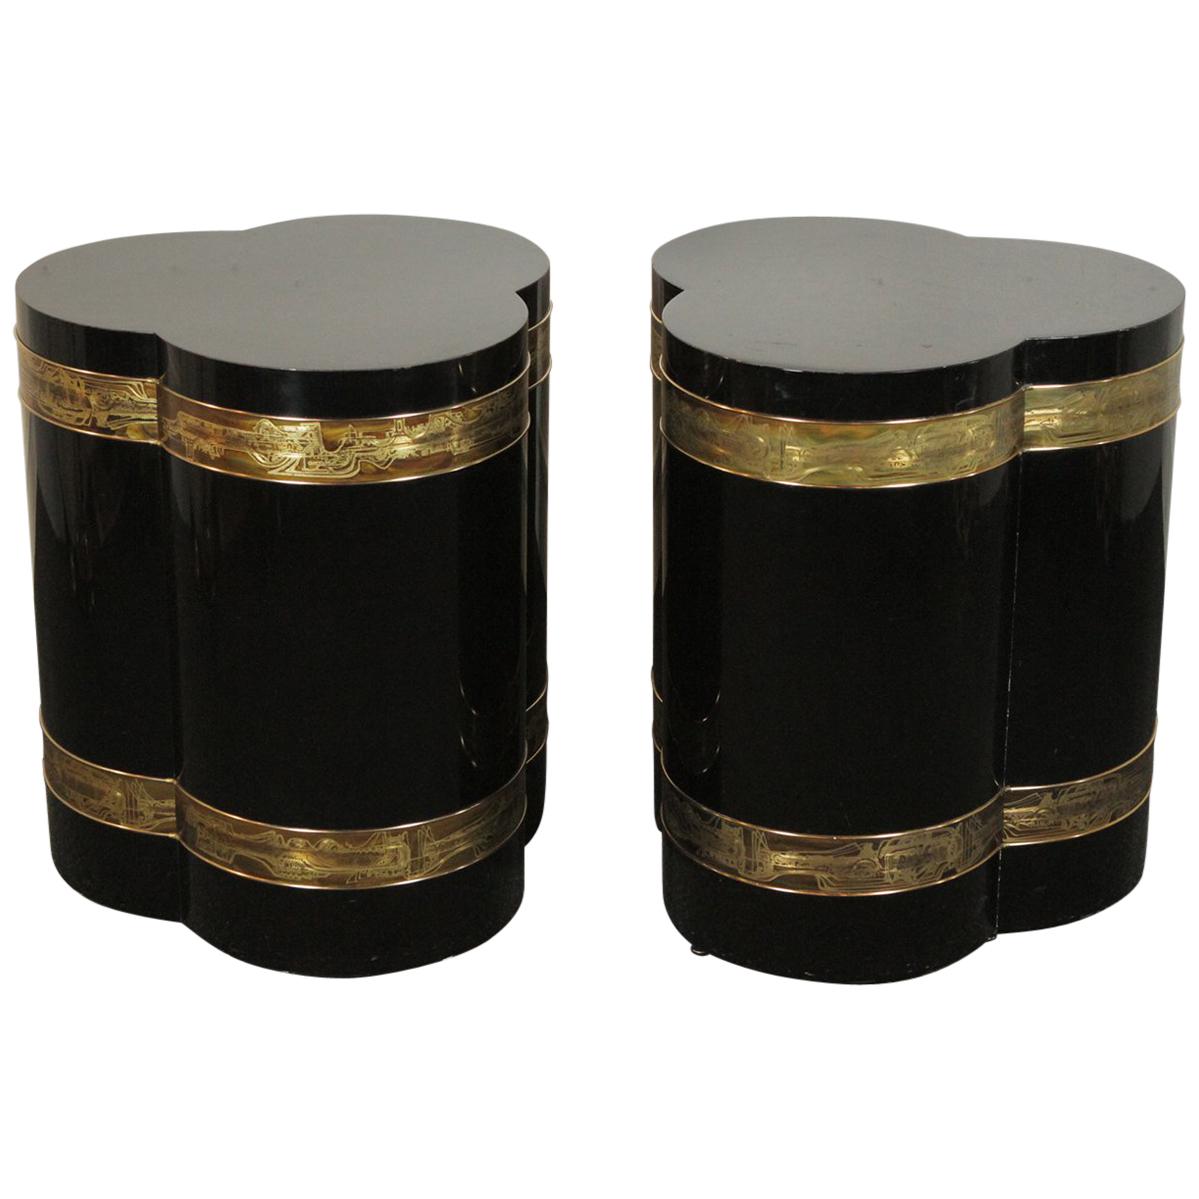 Pair of Bernhard Black Lacquered Low Pedestal Tables for Mastercraft